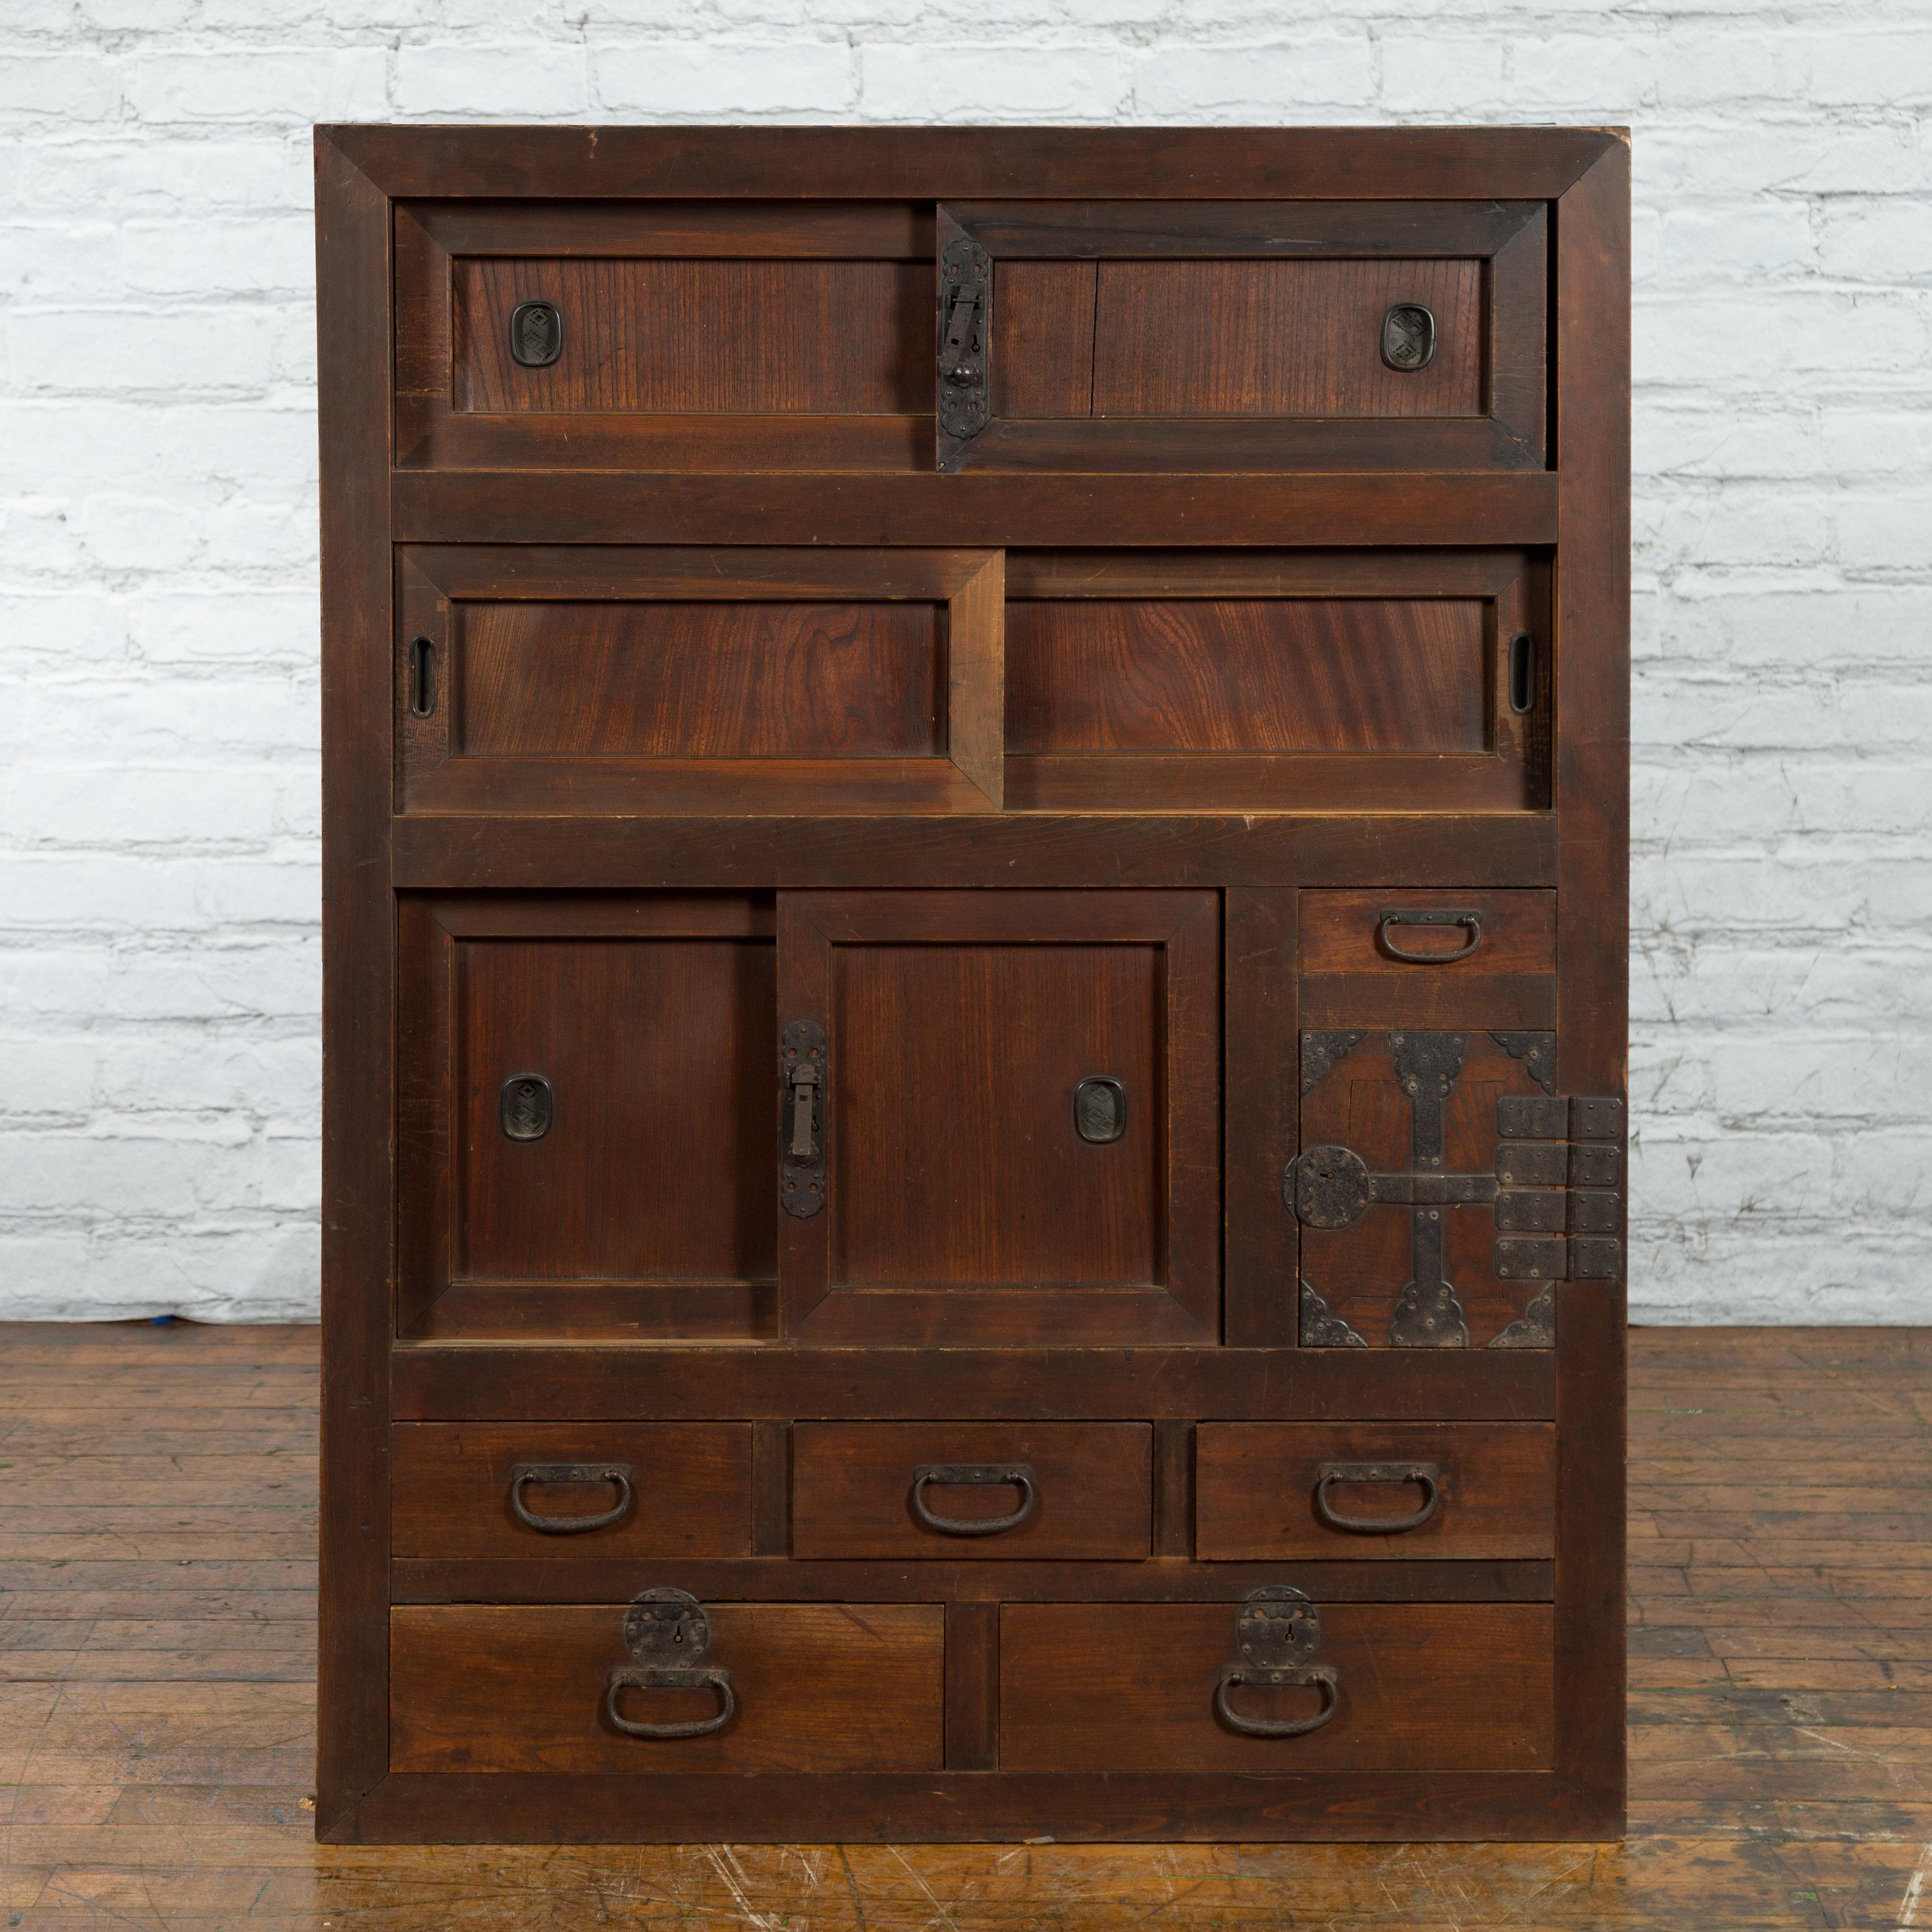 An antique Japanese kitchen cabinet from the 19th century, with sliding doors, drawers and iron hardware. Created during the 19th century, this kitchen cabinet is a fine example of Japan's mastery of cabinetry. The piece showcases a linear